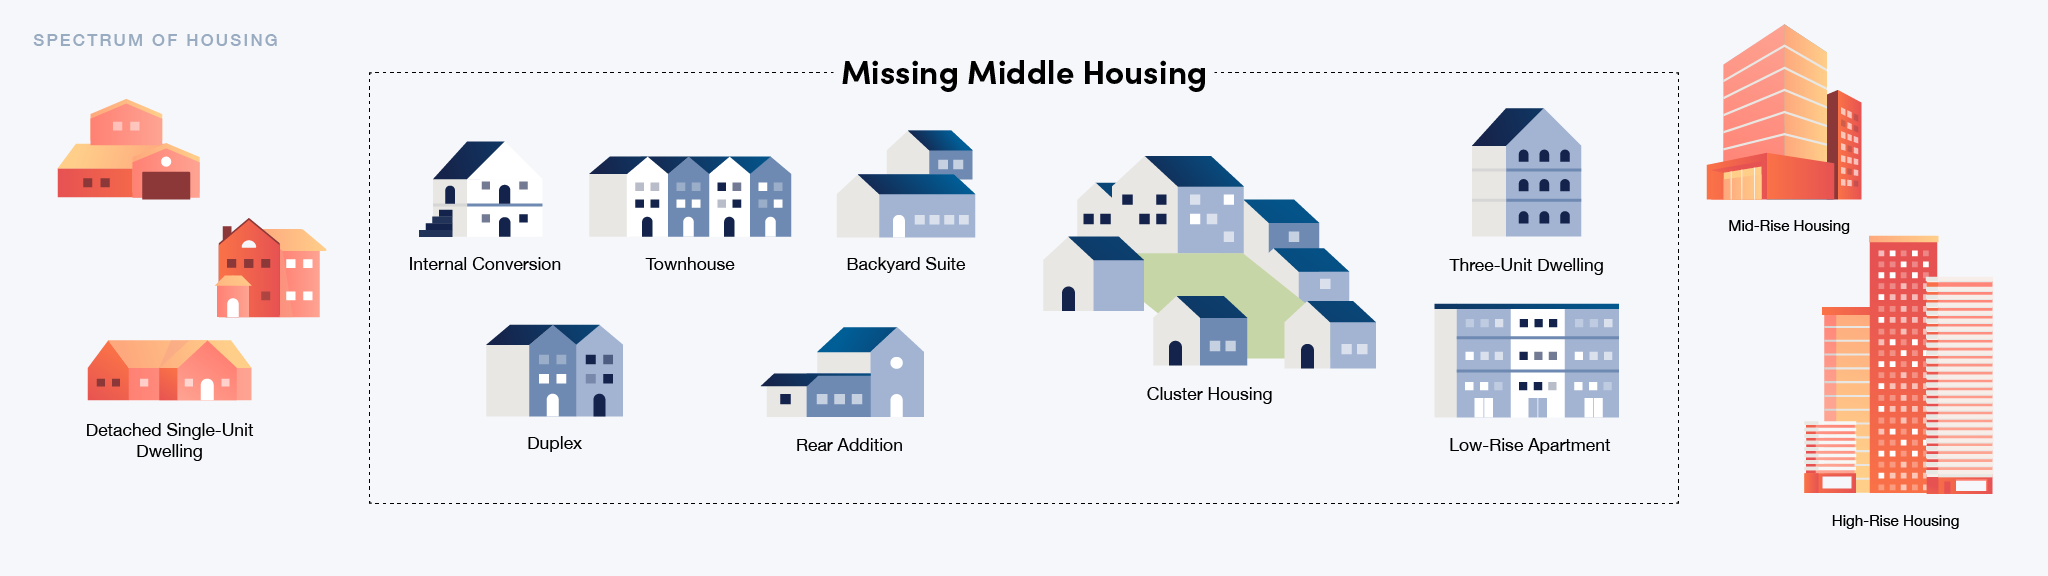 A graphic of various types of missing middle housing represented as colourful icons